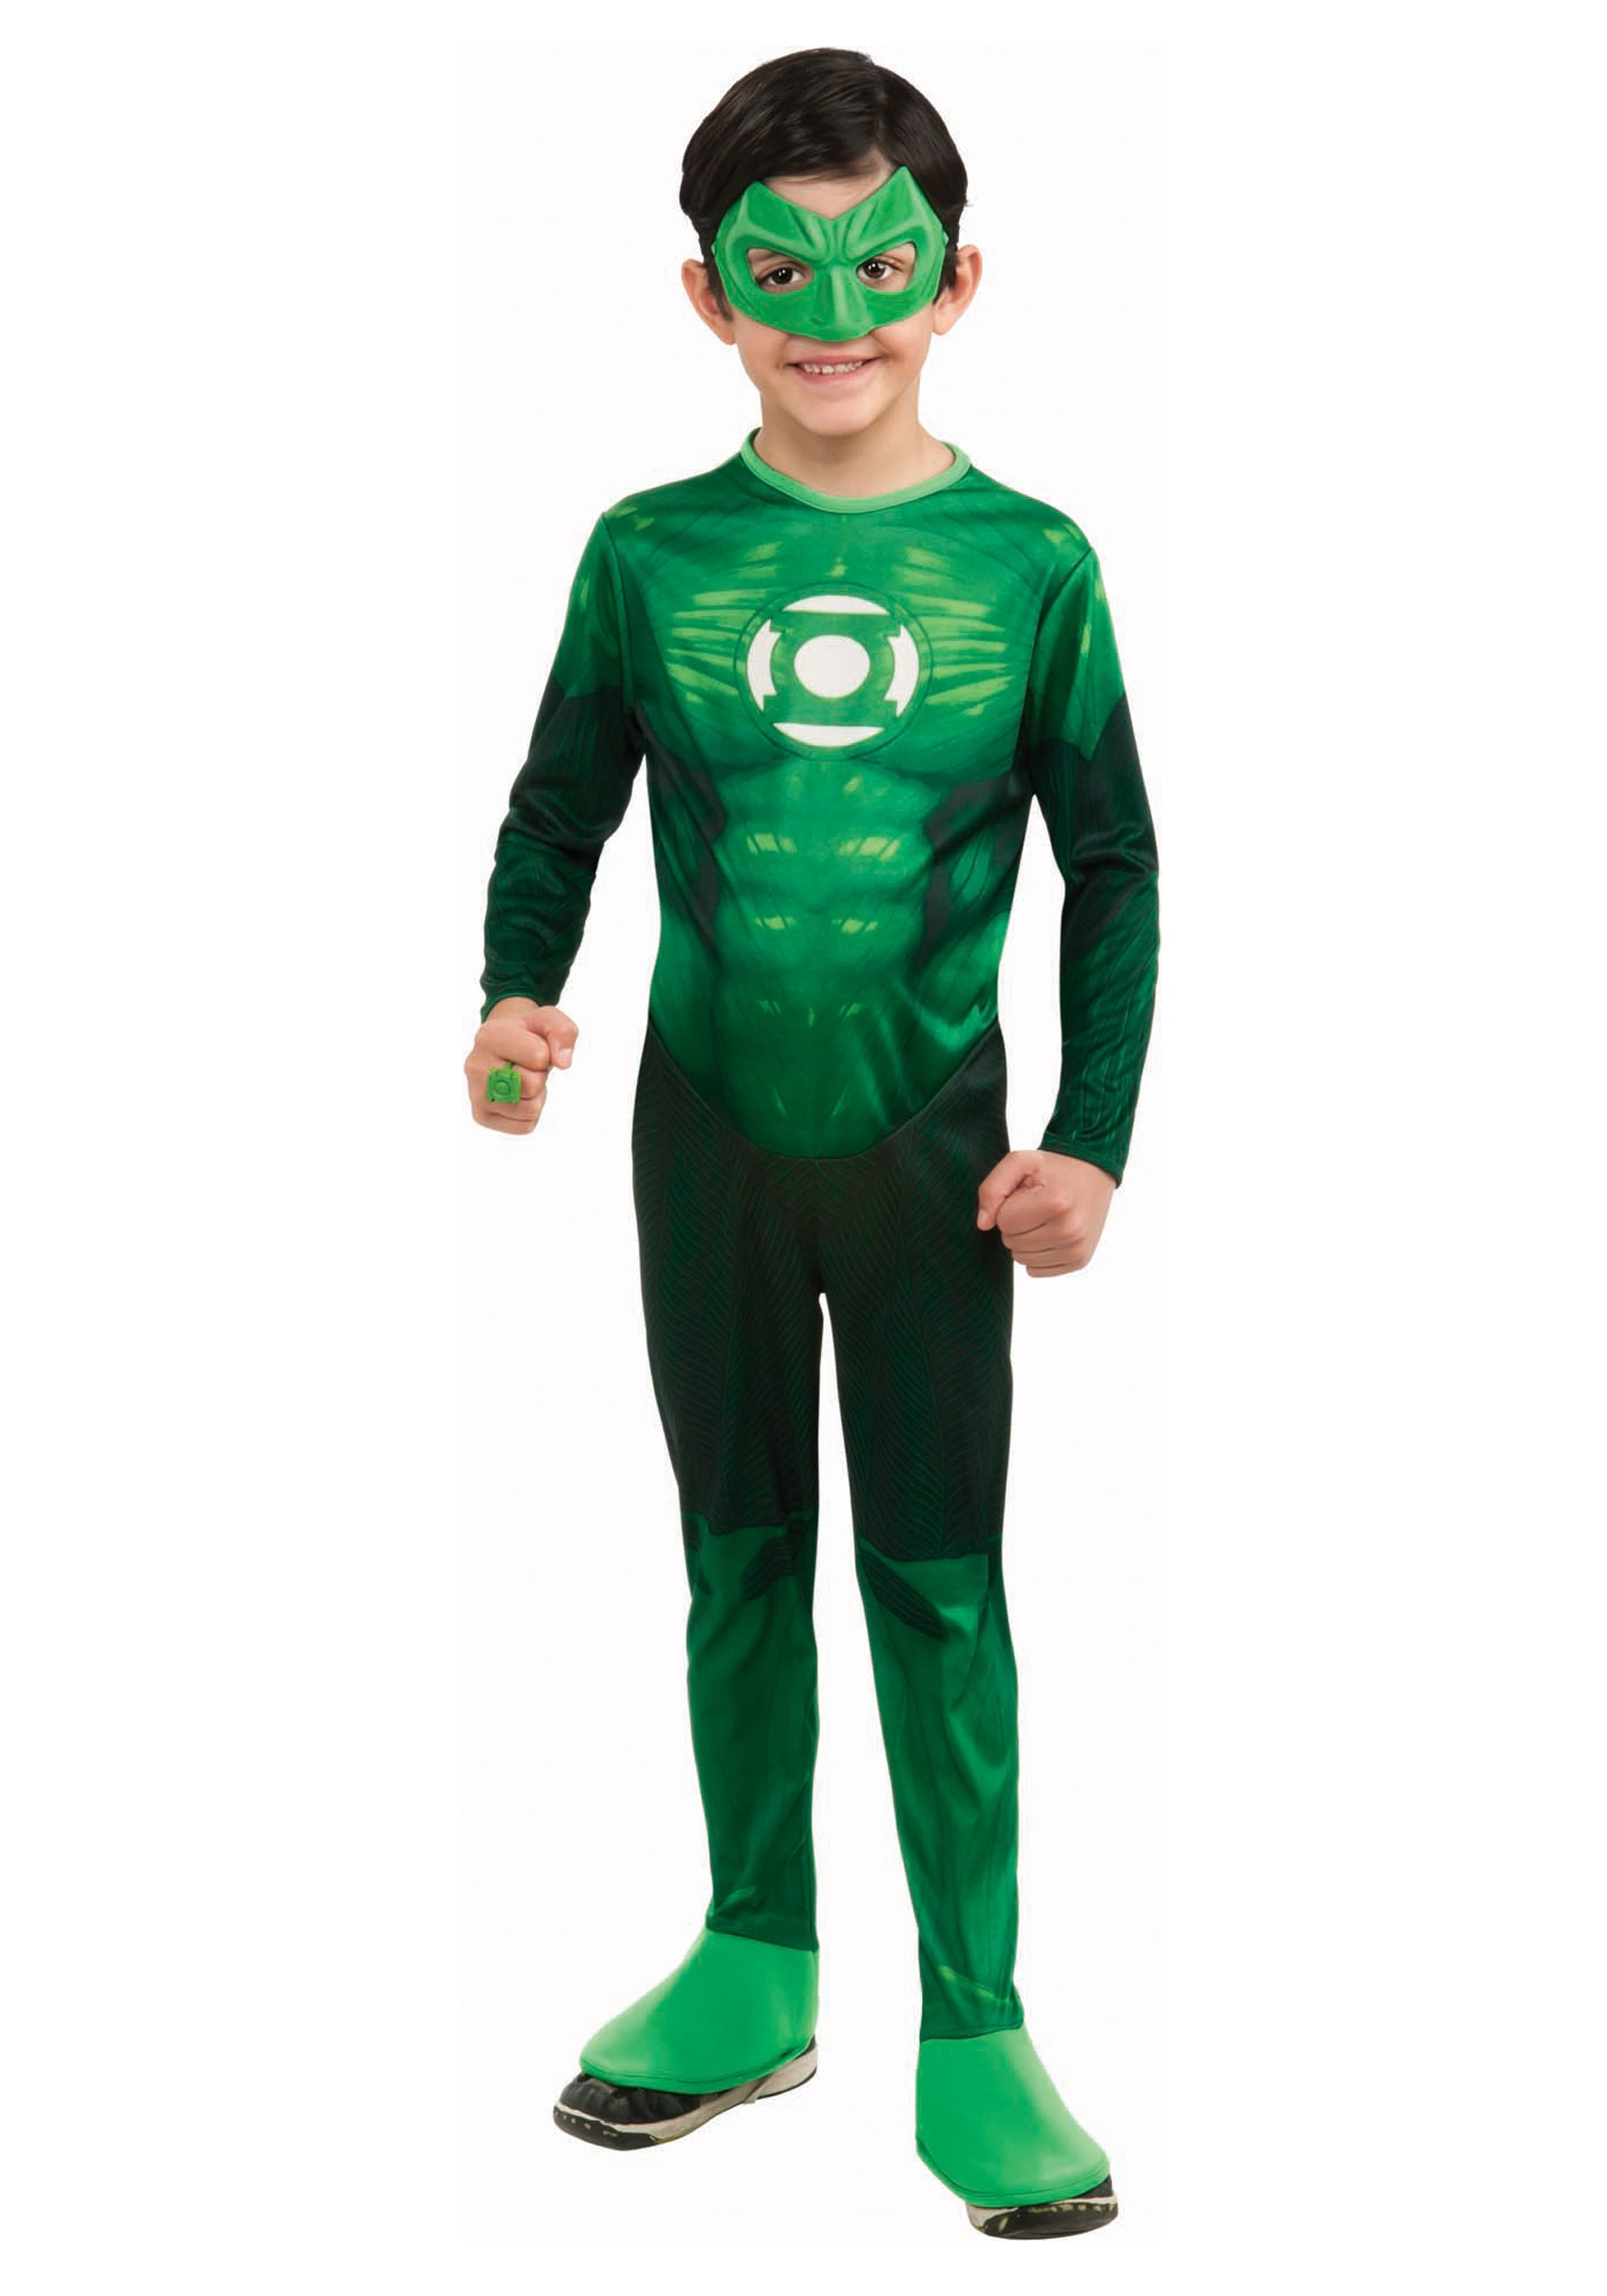 Pictures of Green Lantern Movie Costume.